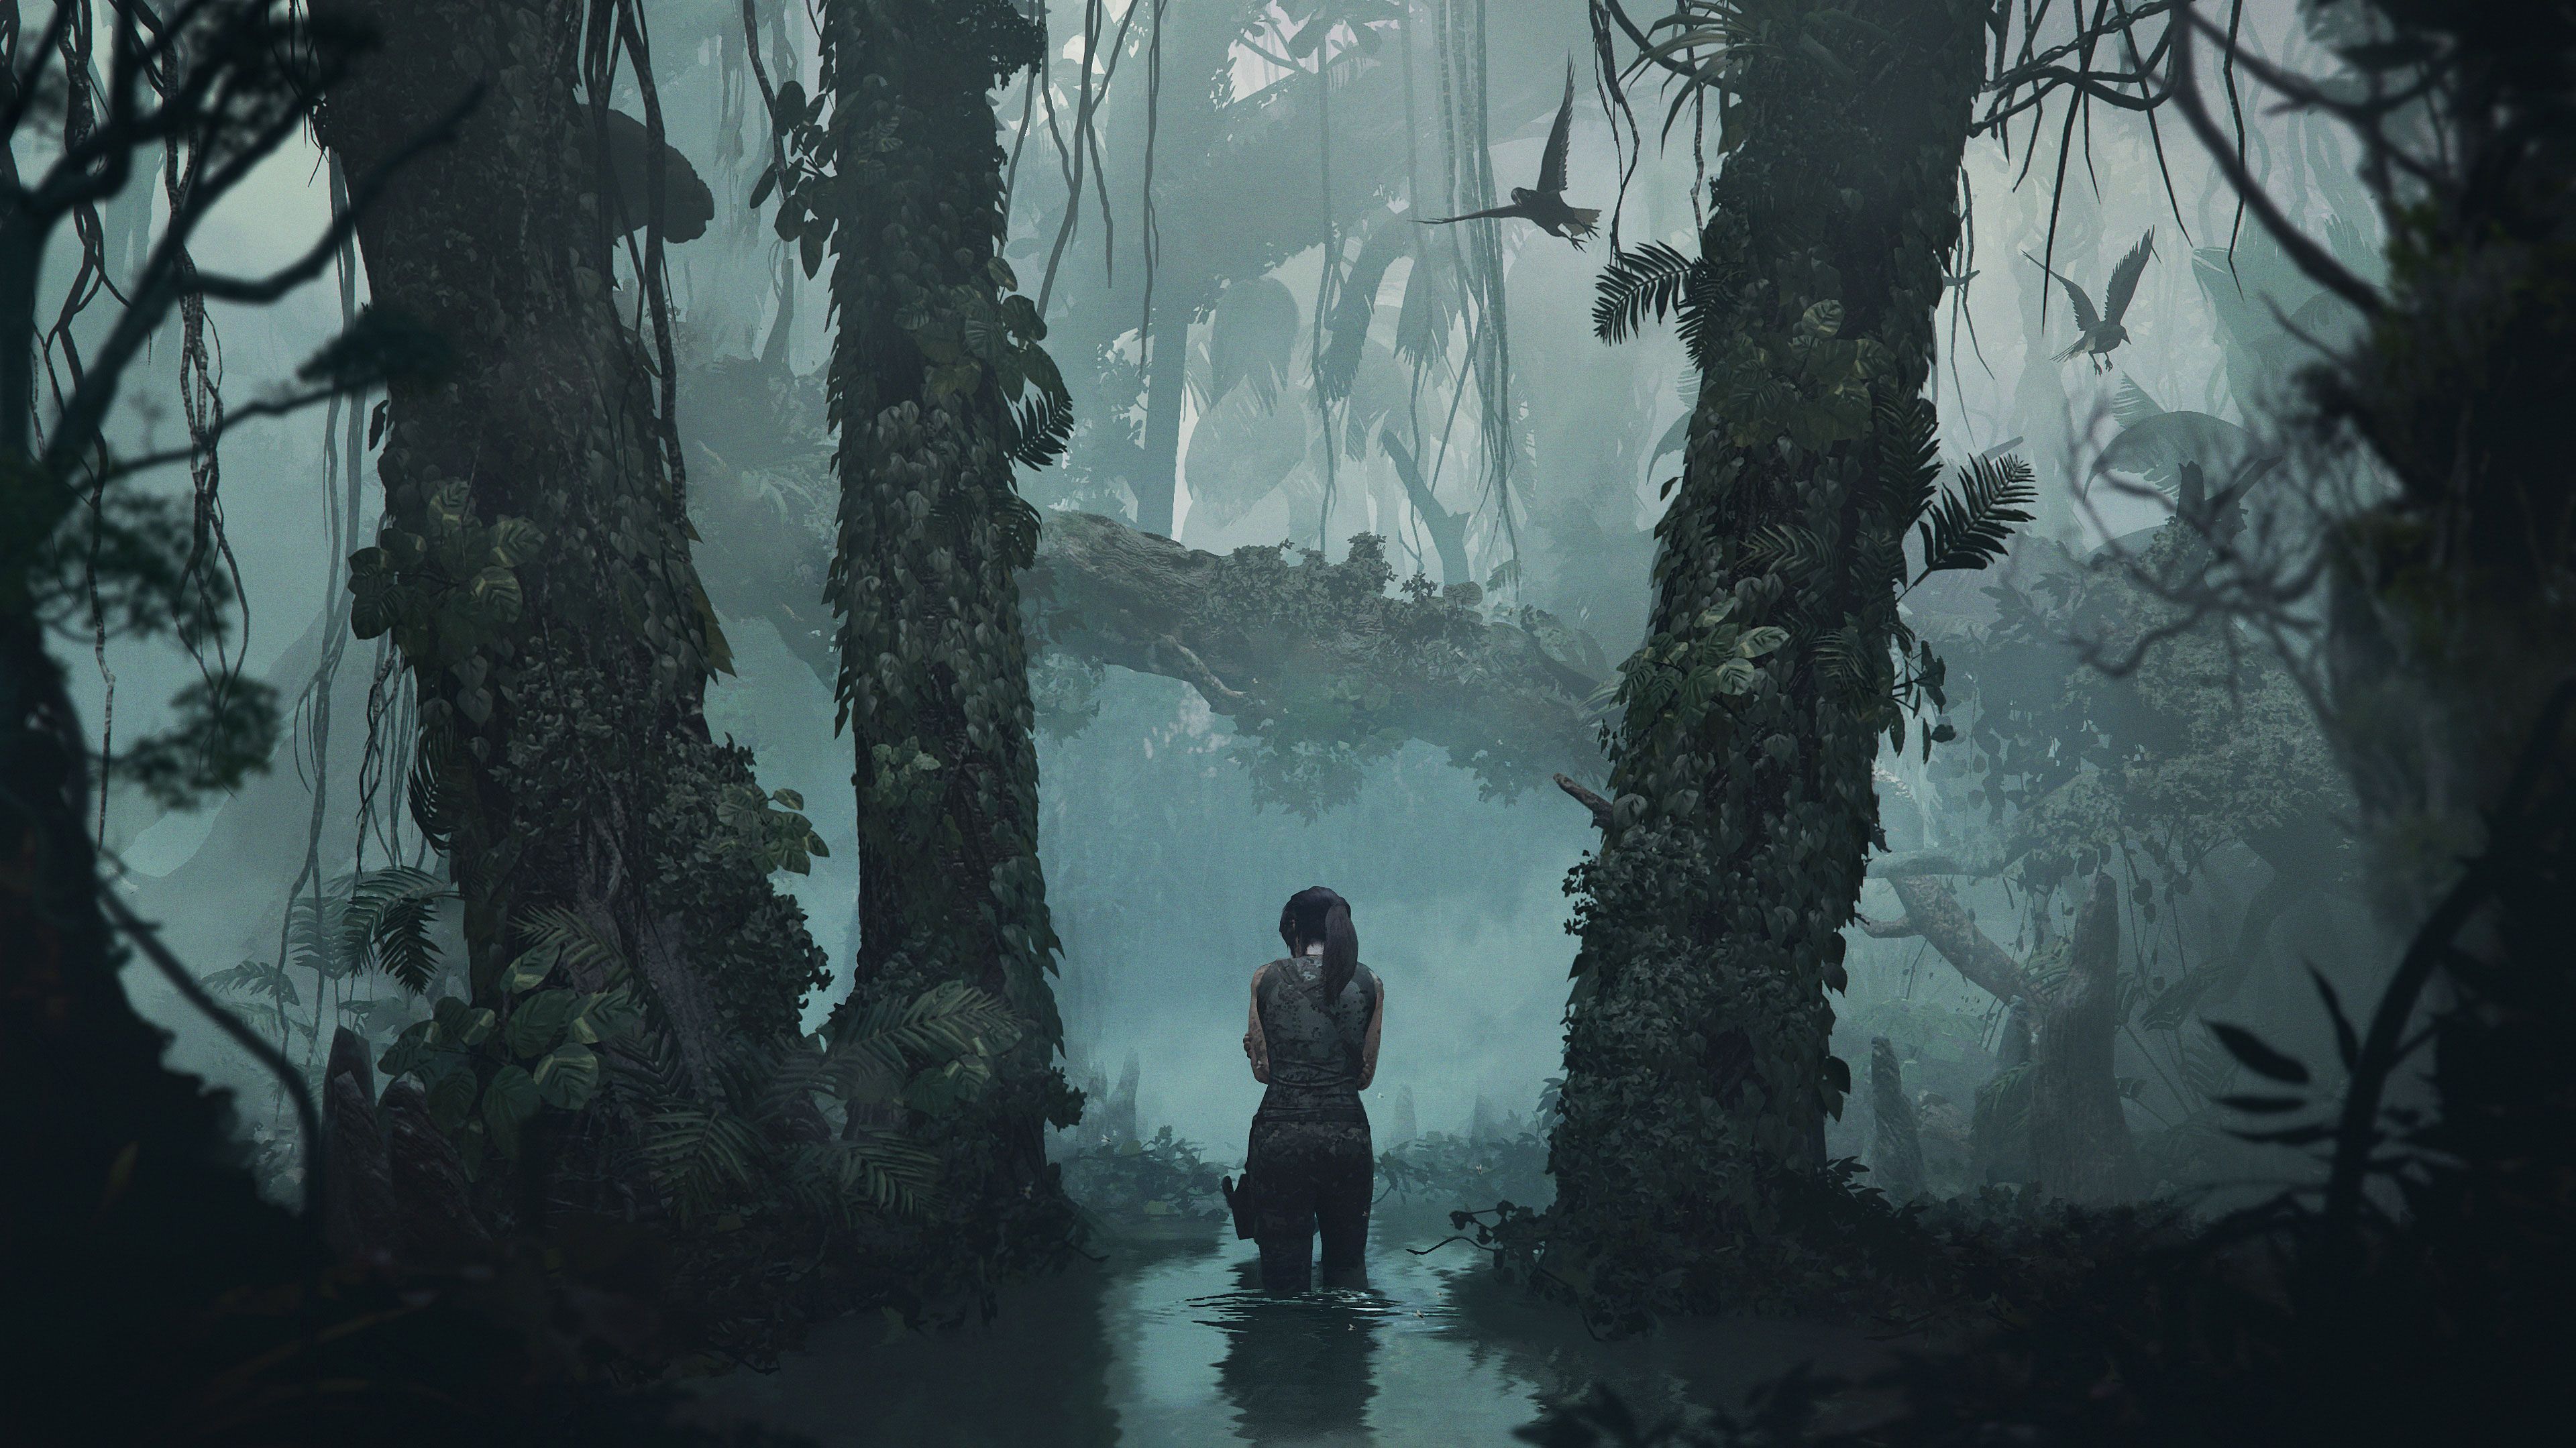 Free download Shadow of the Tomb Raider Wallpaper in Ultra HD 4K